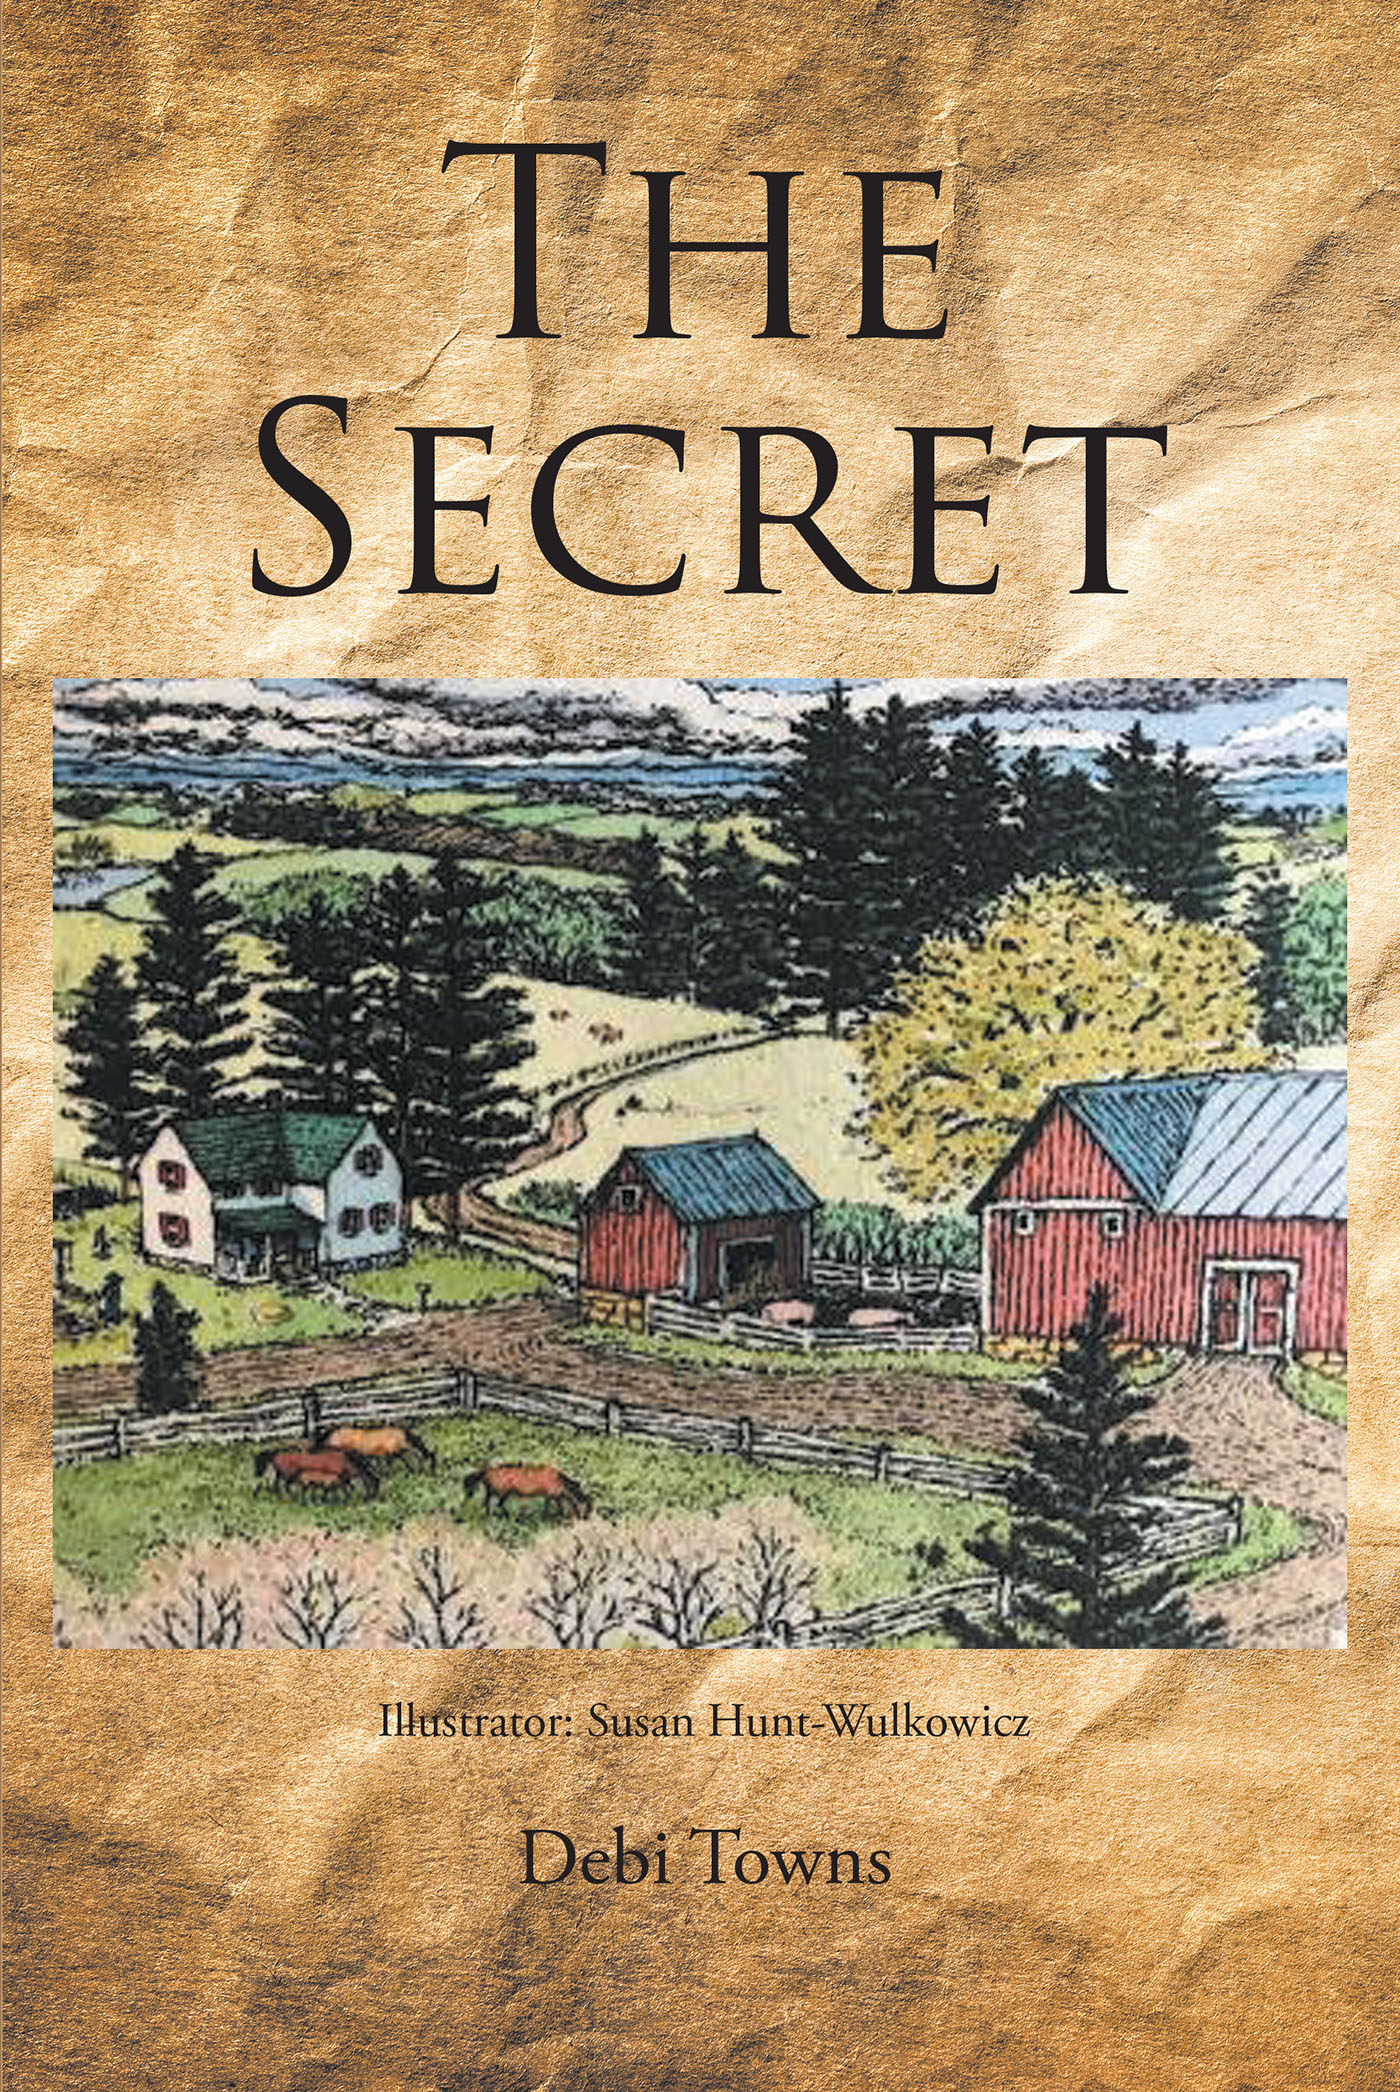 Author Debi Towns’s Newly Released "The Secret" Tells the Poignant Story of the Awakening of a Young Woman to God's Call to Forge a Strong Relationship with Him